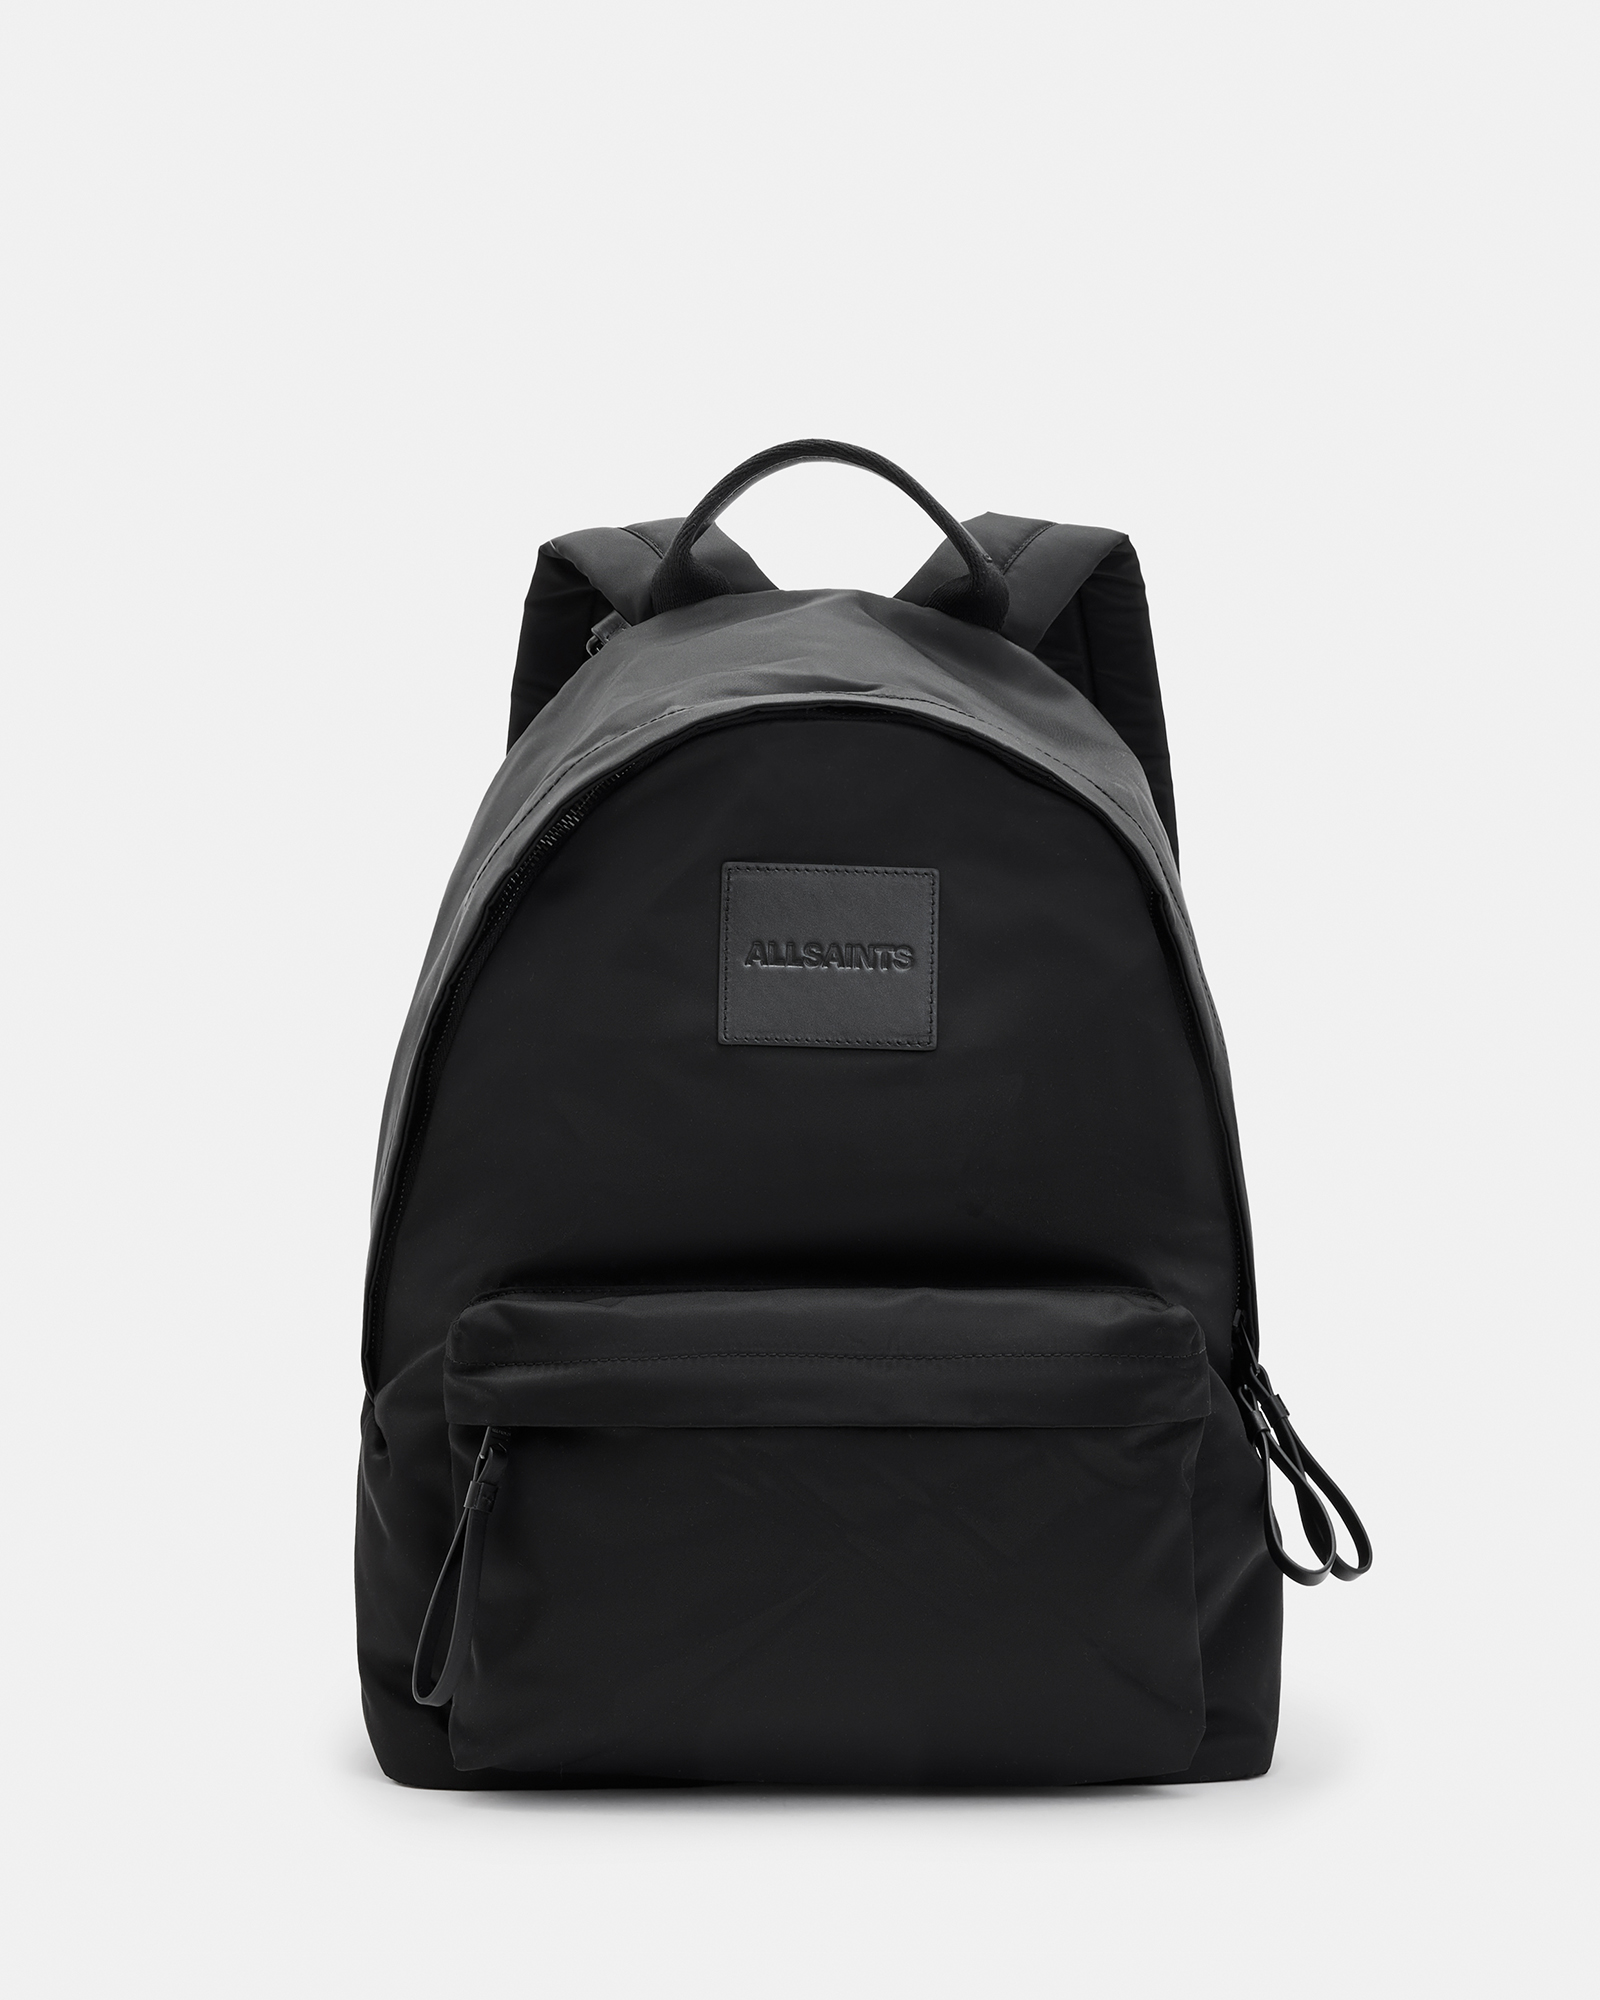 AllSaints Carabiner Recycled Backpack,, Black, Size: One Size